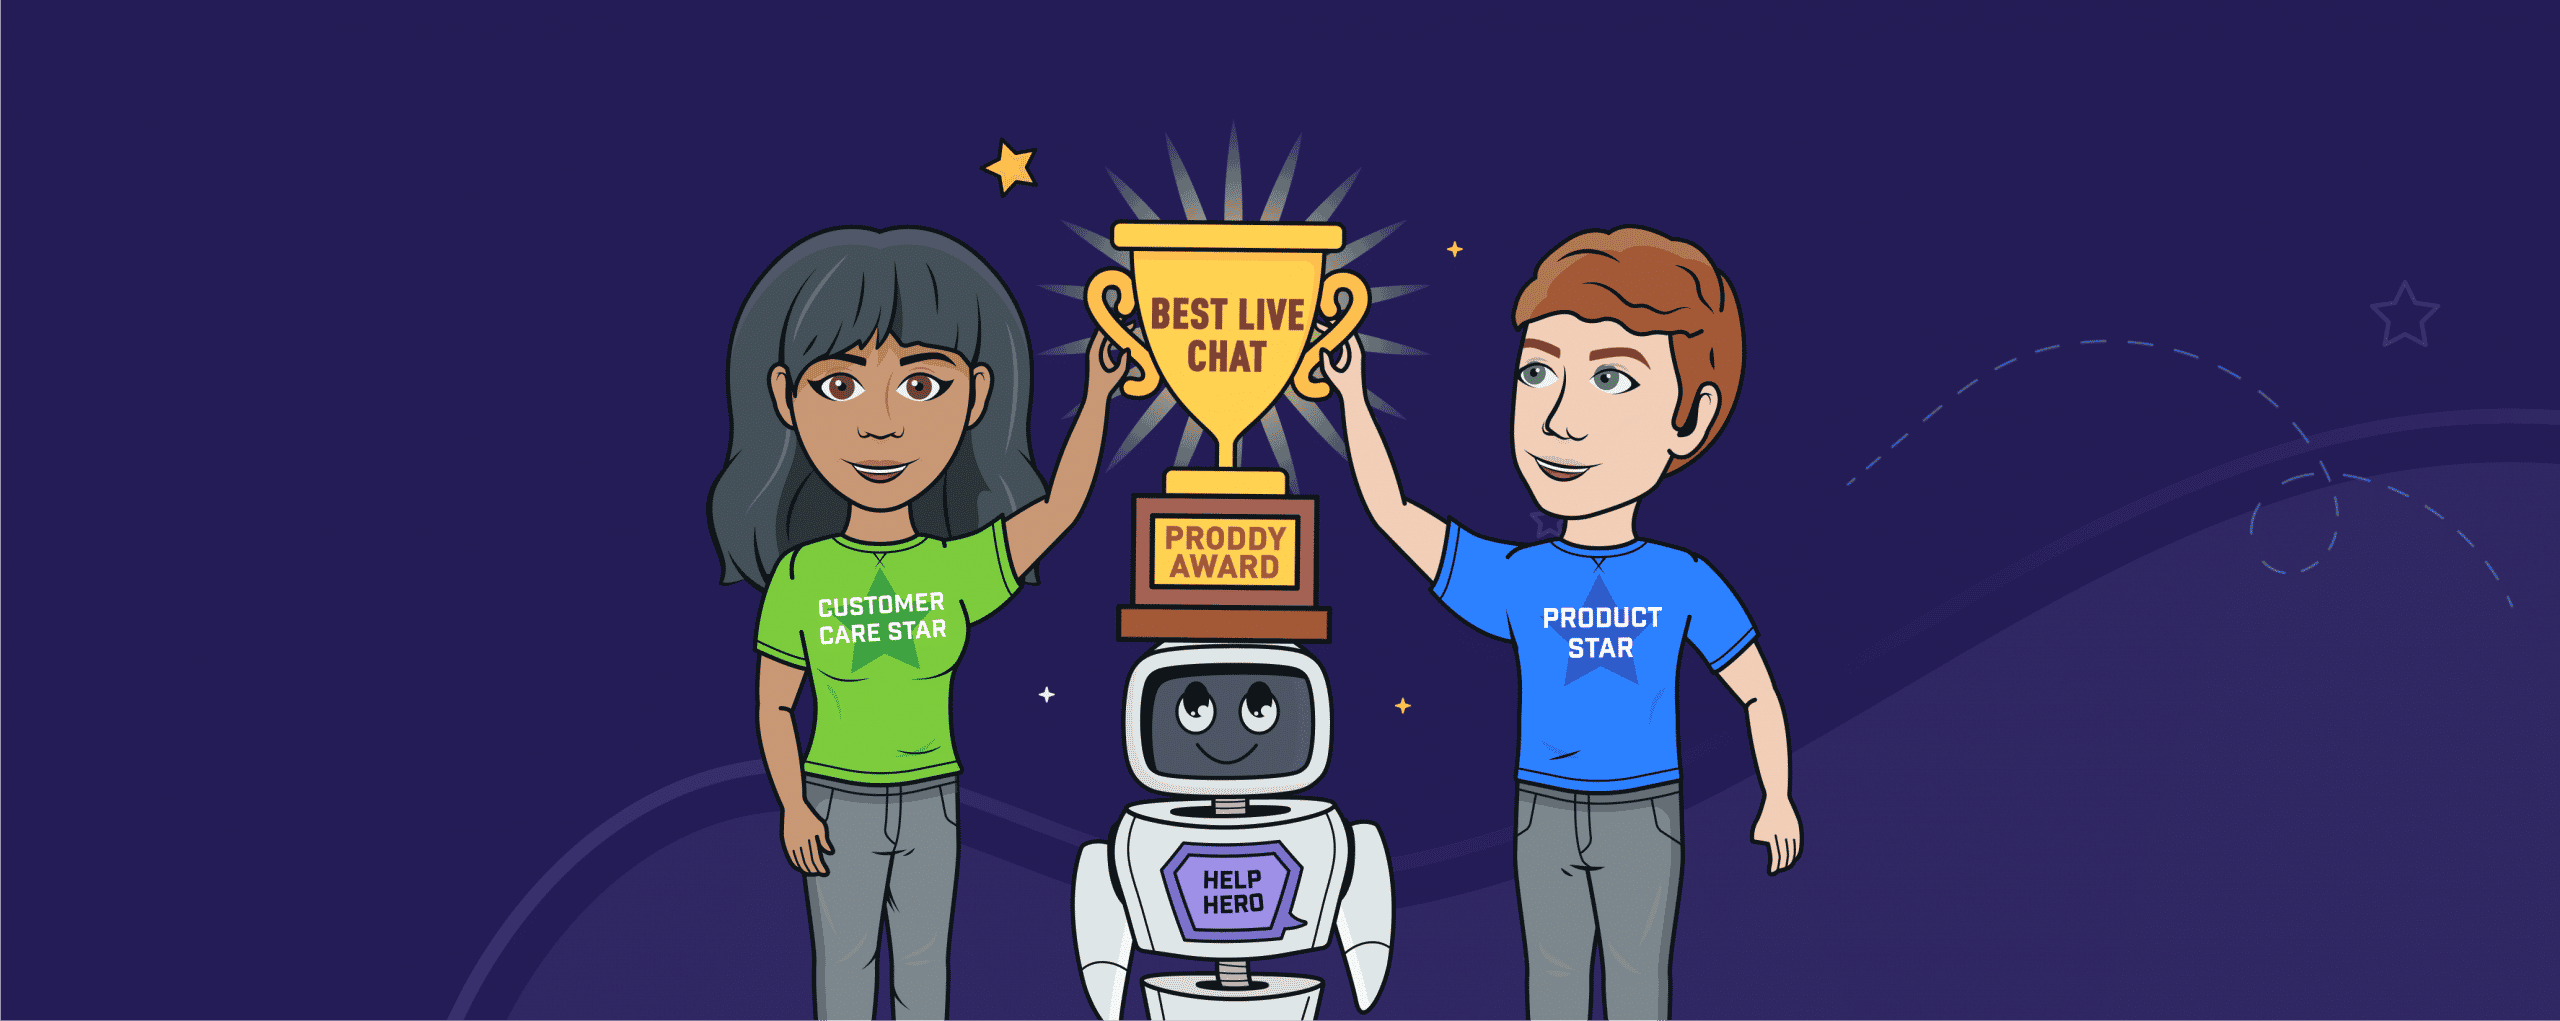 Helpshift winning Live Chat Proddy award - Image showing Head of Customer Service, Head of Product, and Help Bot holding first place award trophy